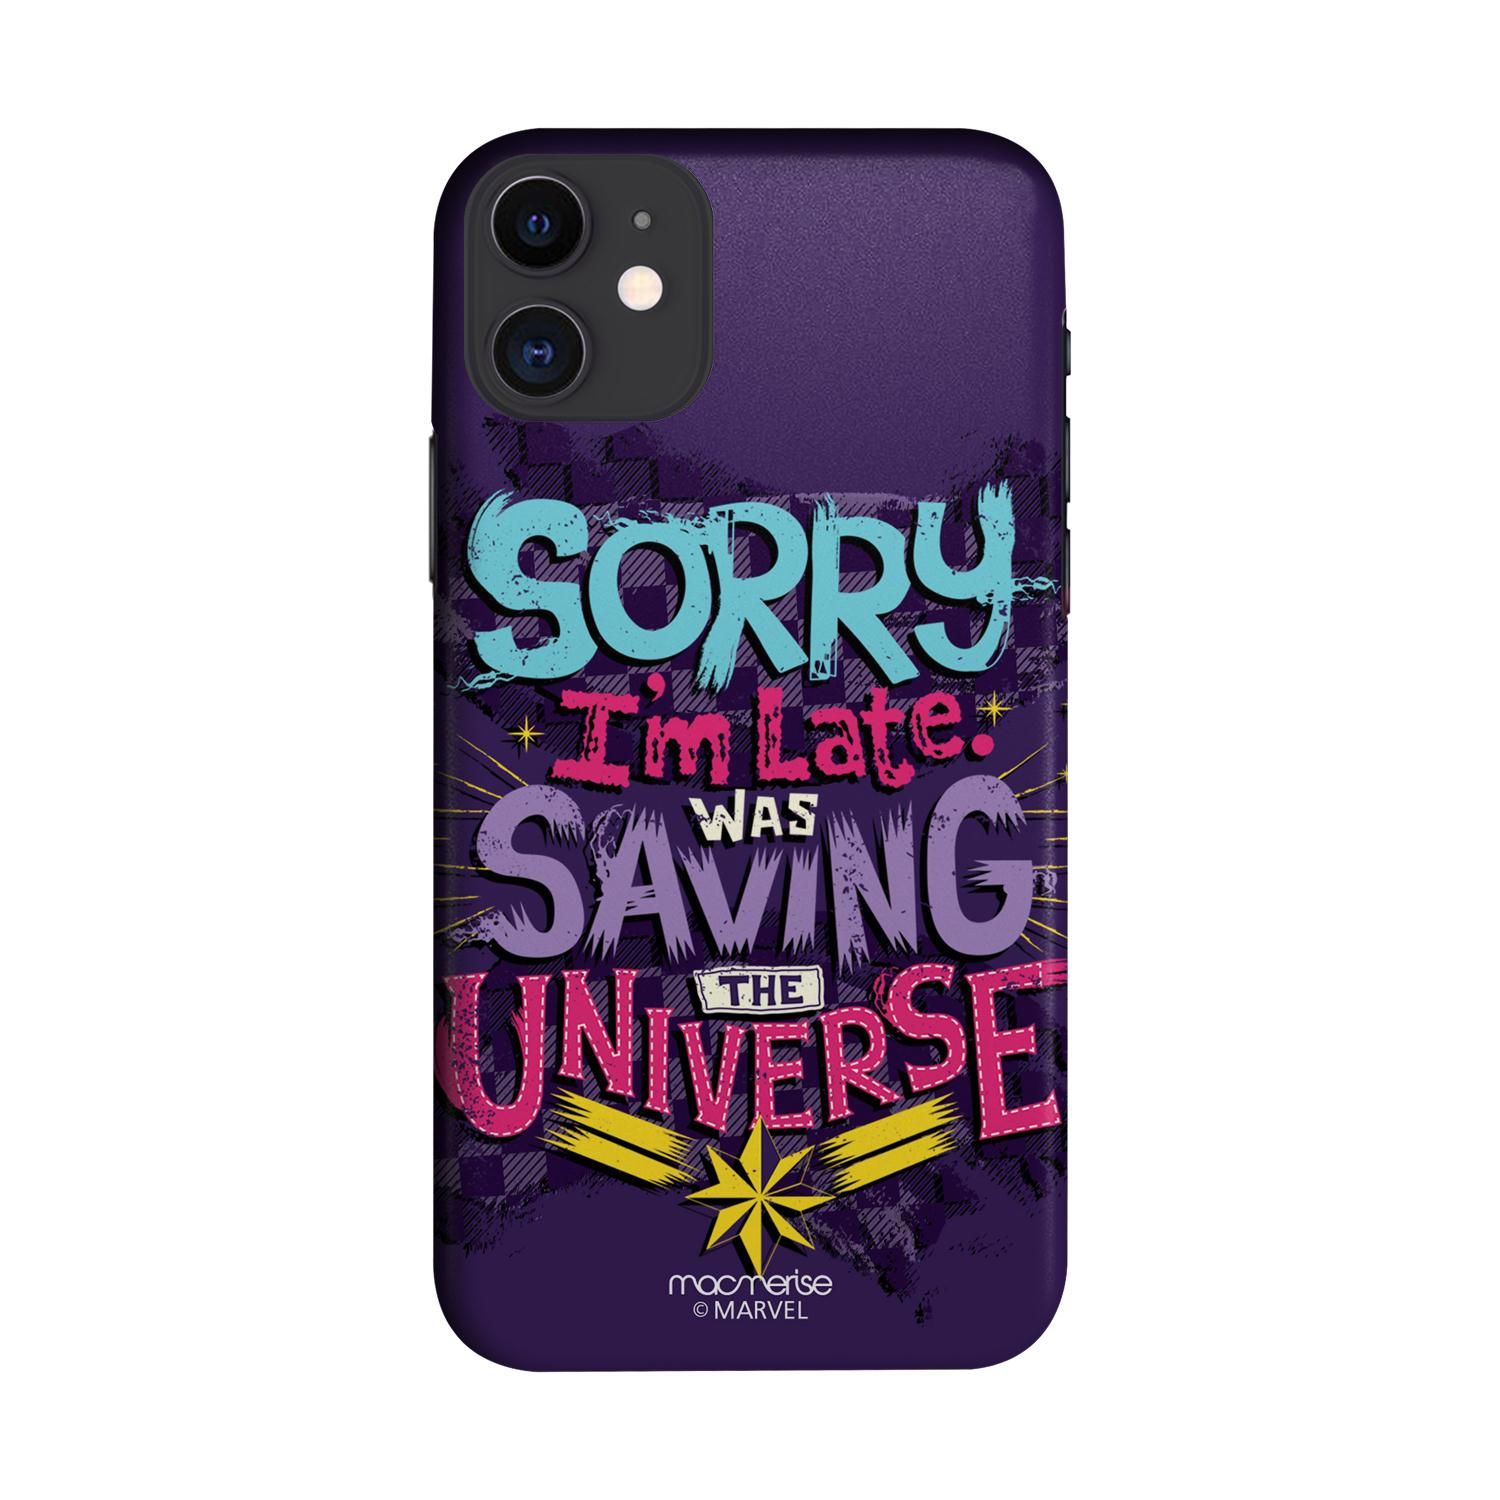 Buy Saving The Universe - Sleek Phone Case for iPhone 11 Online